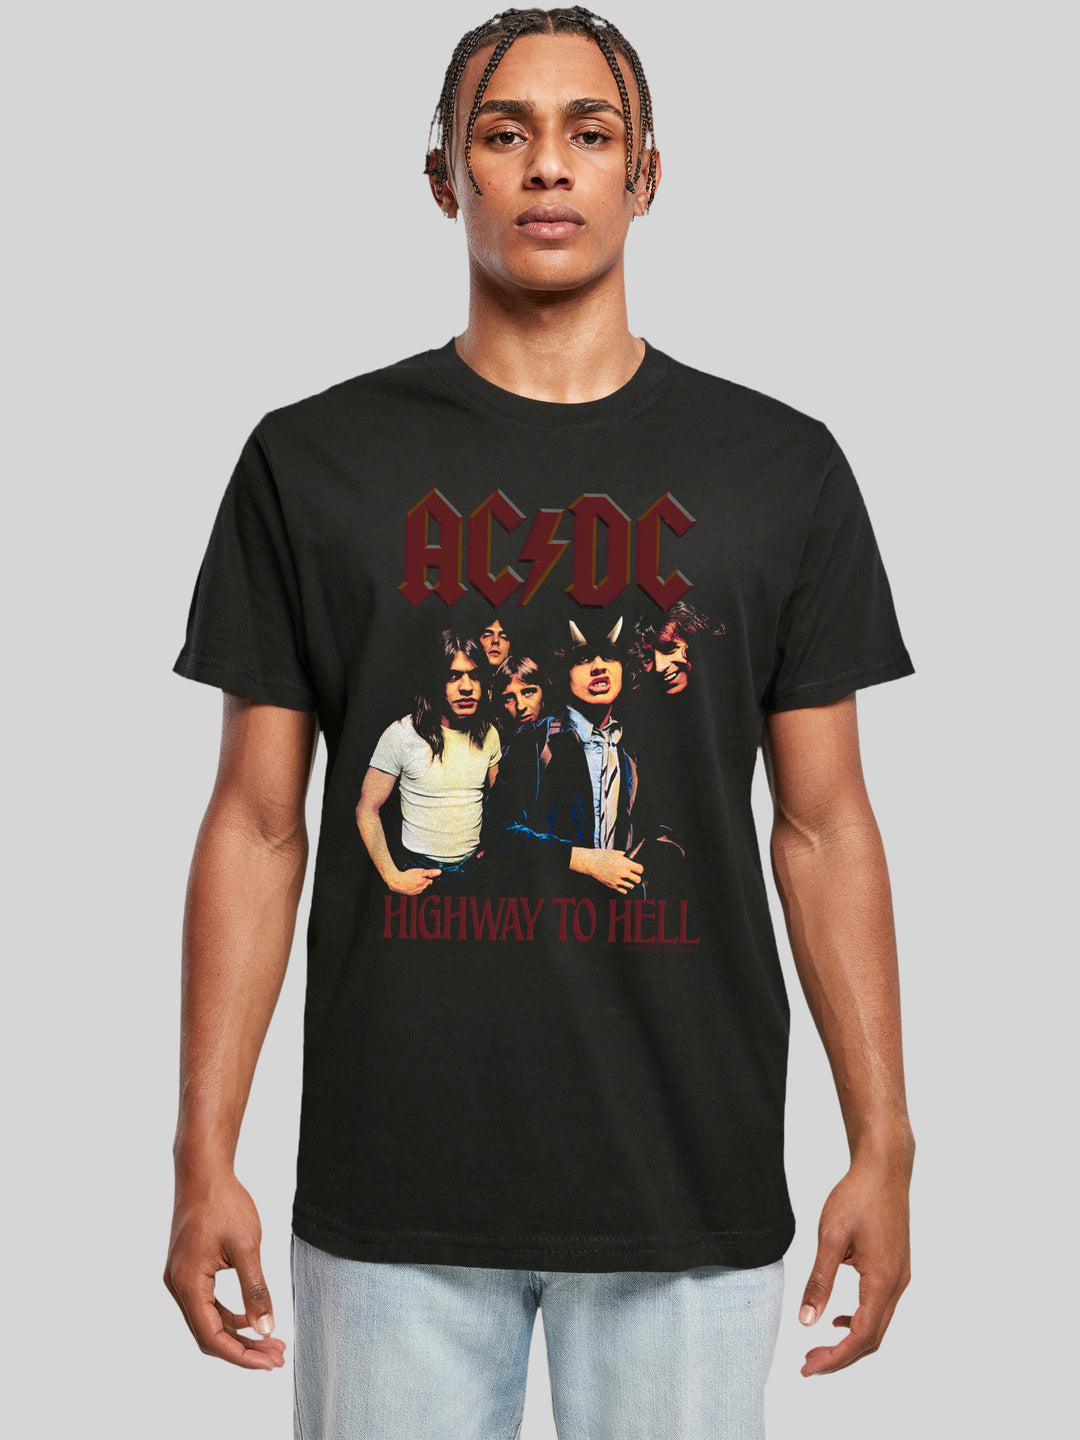 ACDC Highway To Hell Group with T-Shirt Round Neck